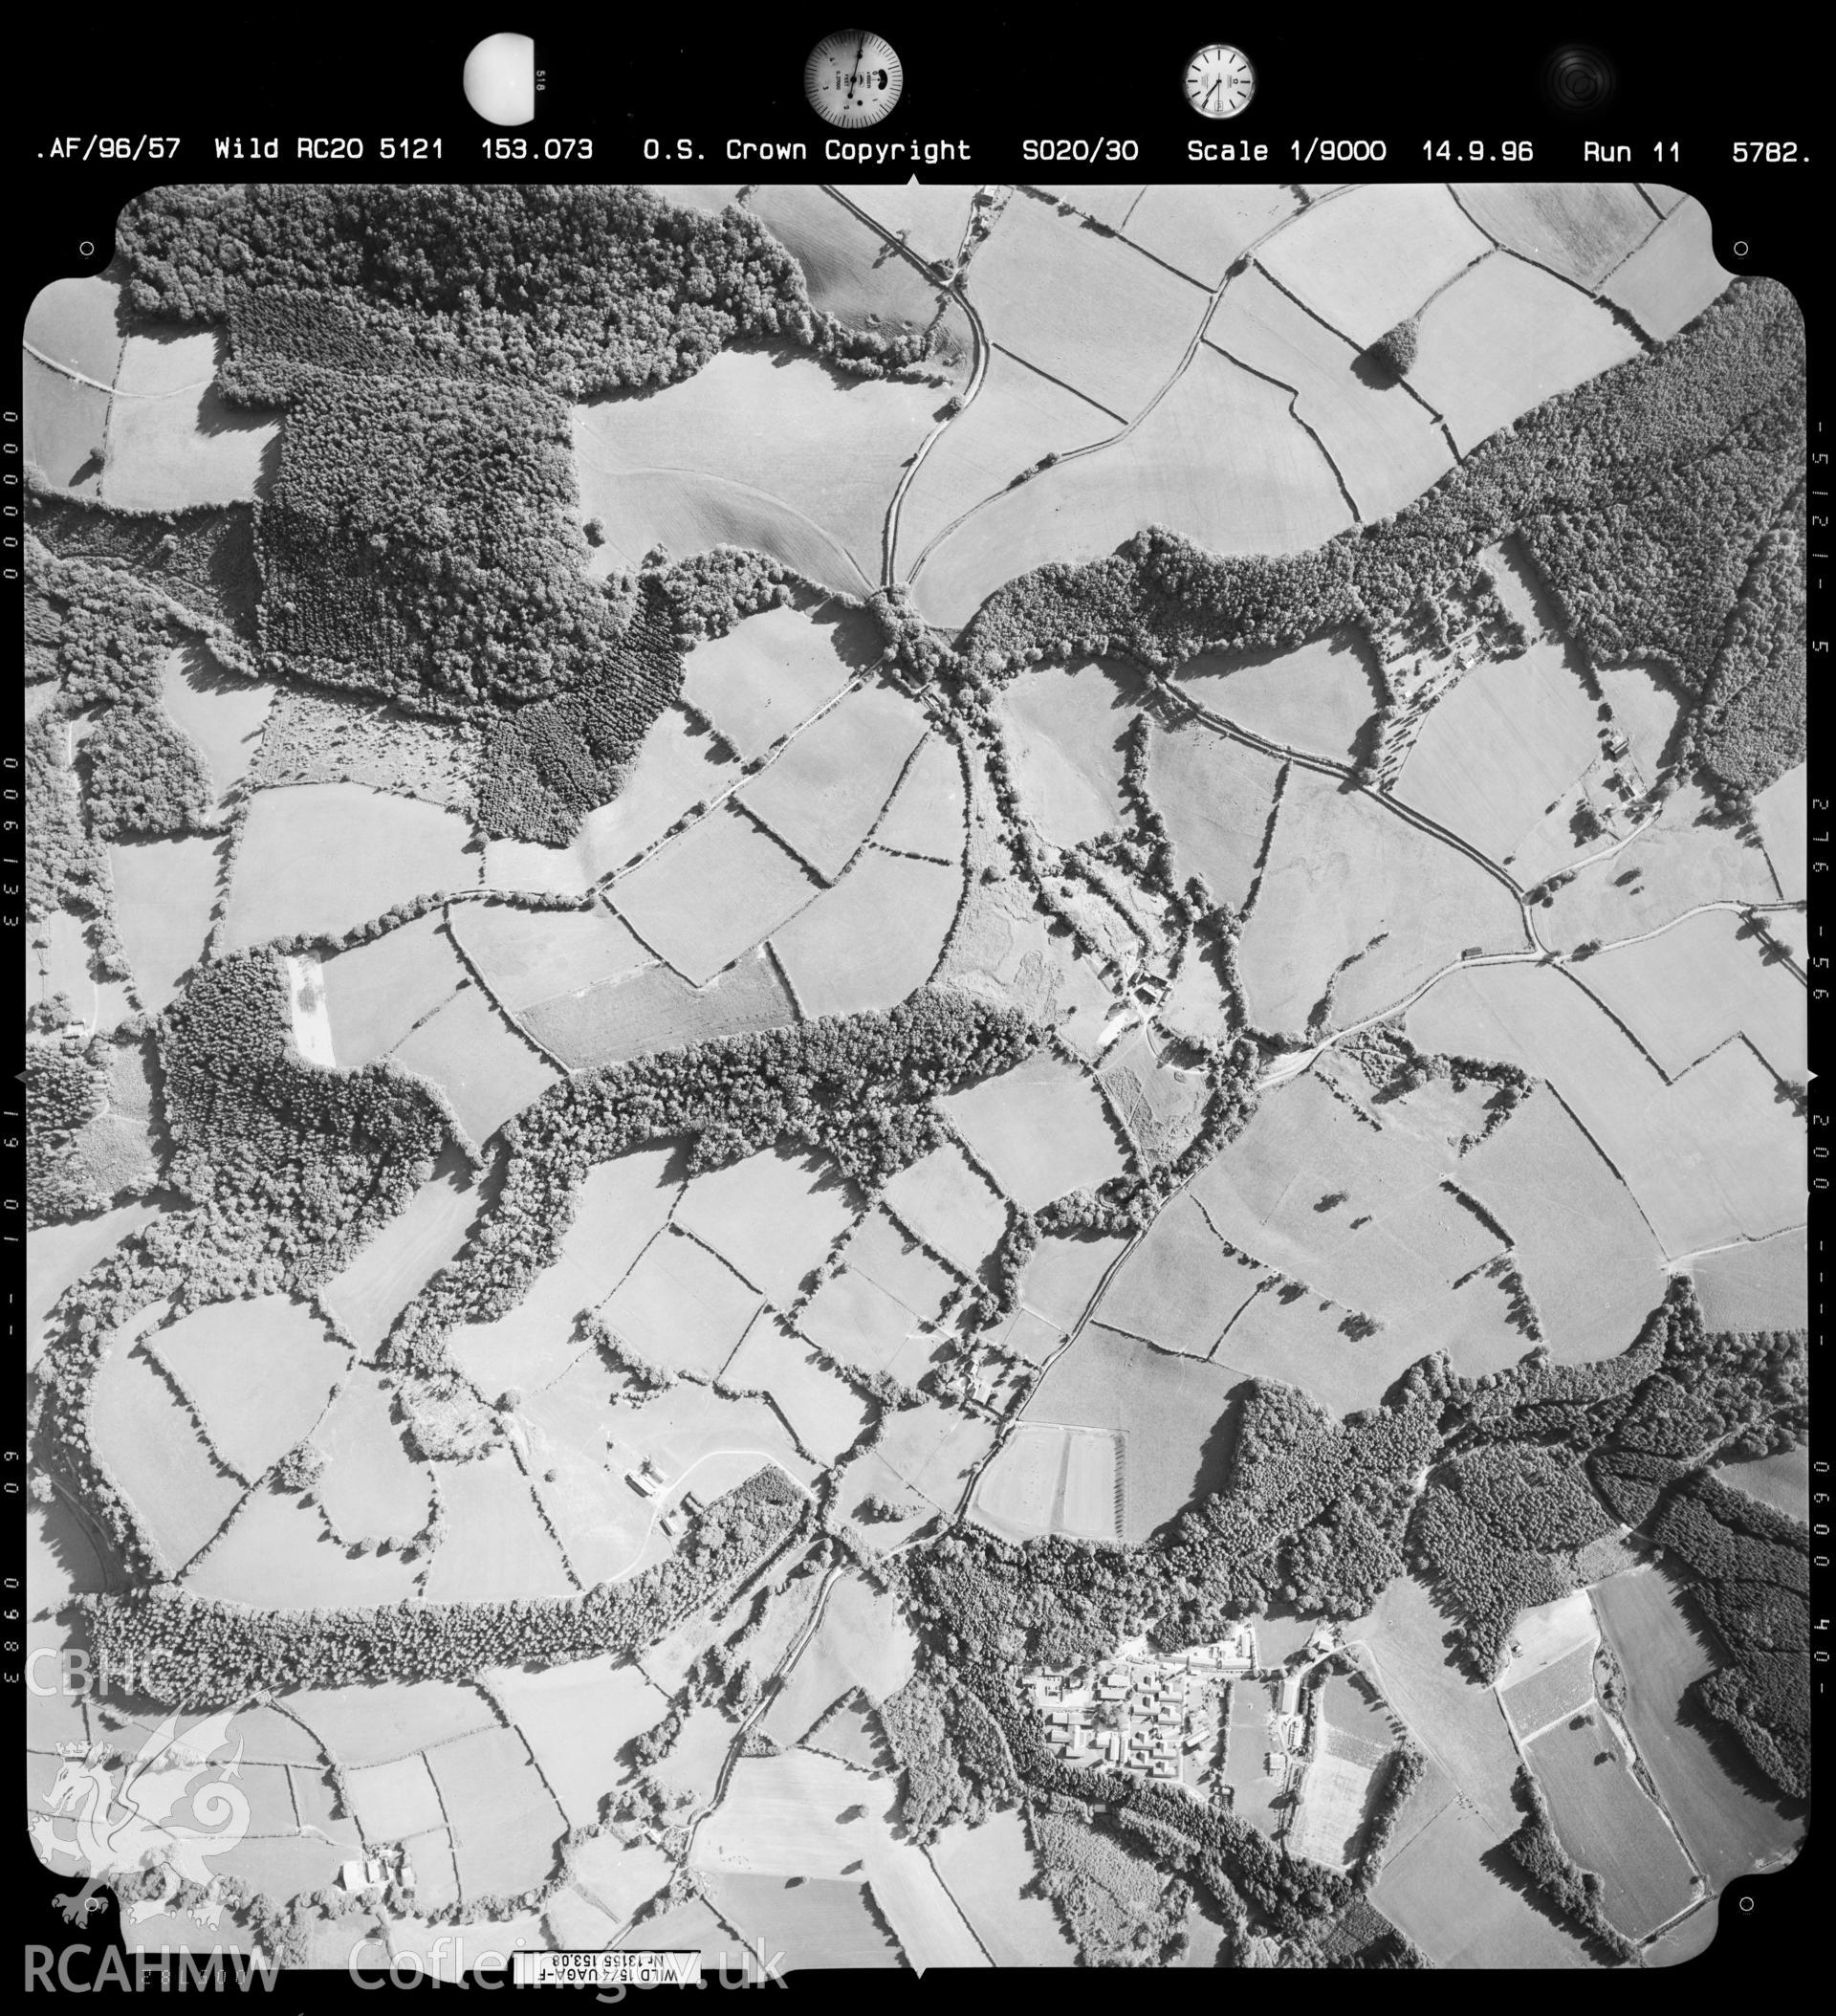 Digitized copy of an aerial photograph showing the Hirwaun area, taken by Ordnance Survey, 1987.